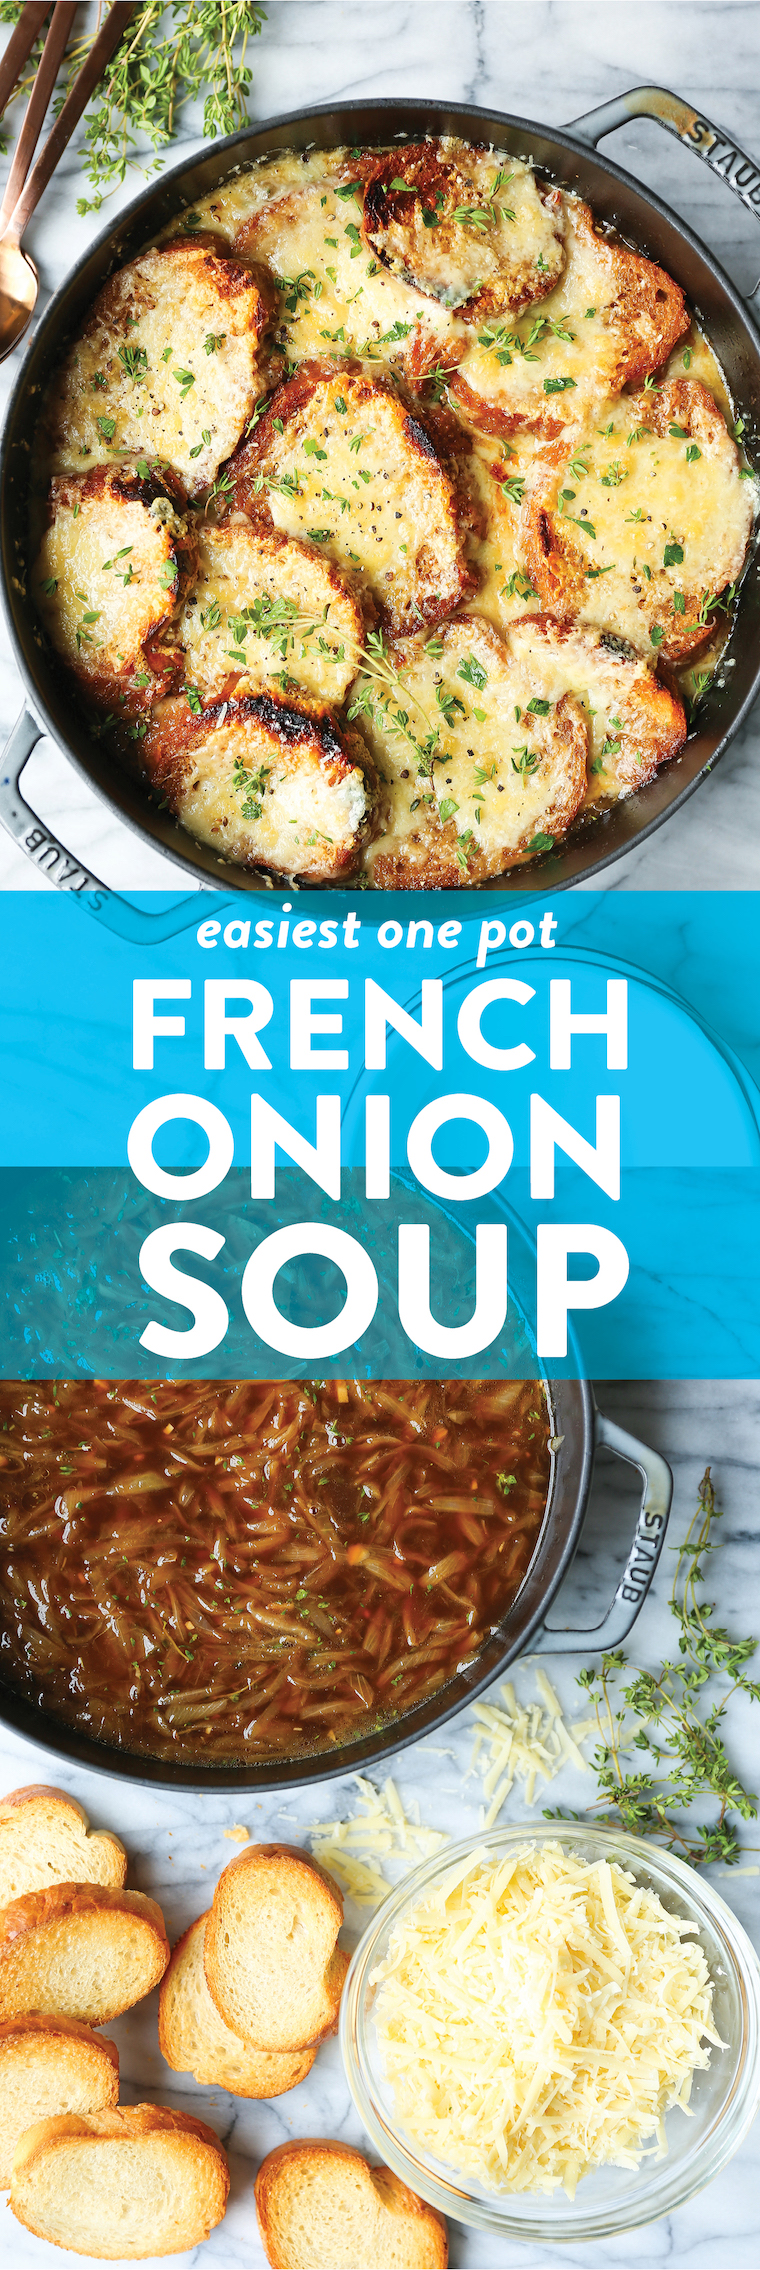 One Pot French Onion Soup - A no-fuss version! No transferring to ramekins, no nothing! Make everything into a ONE POT WONER and serve. So easy. SO GOOD!